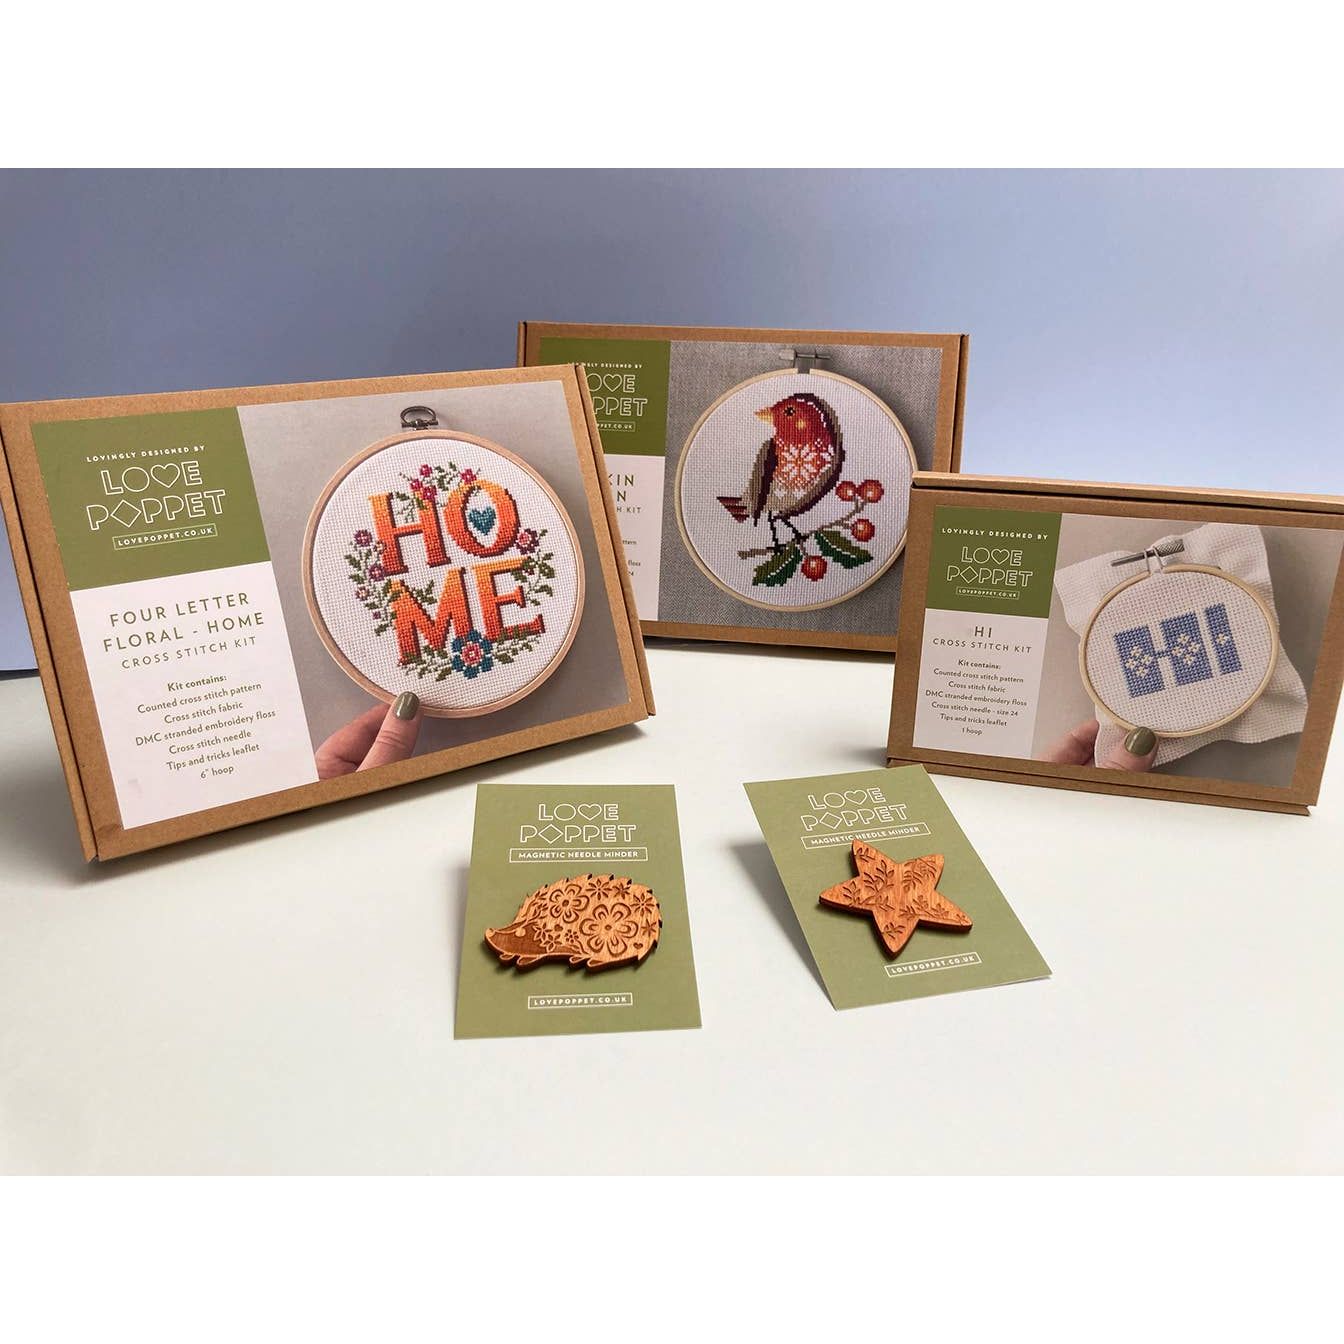 Driving Home for Christmas Cross Stitch Kit